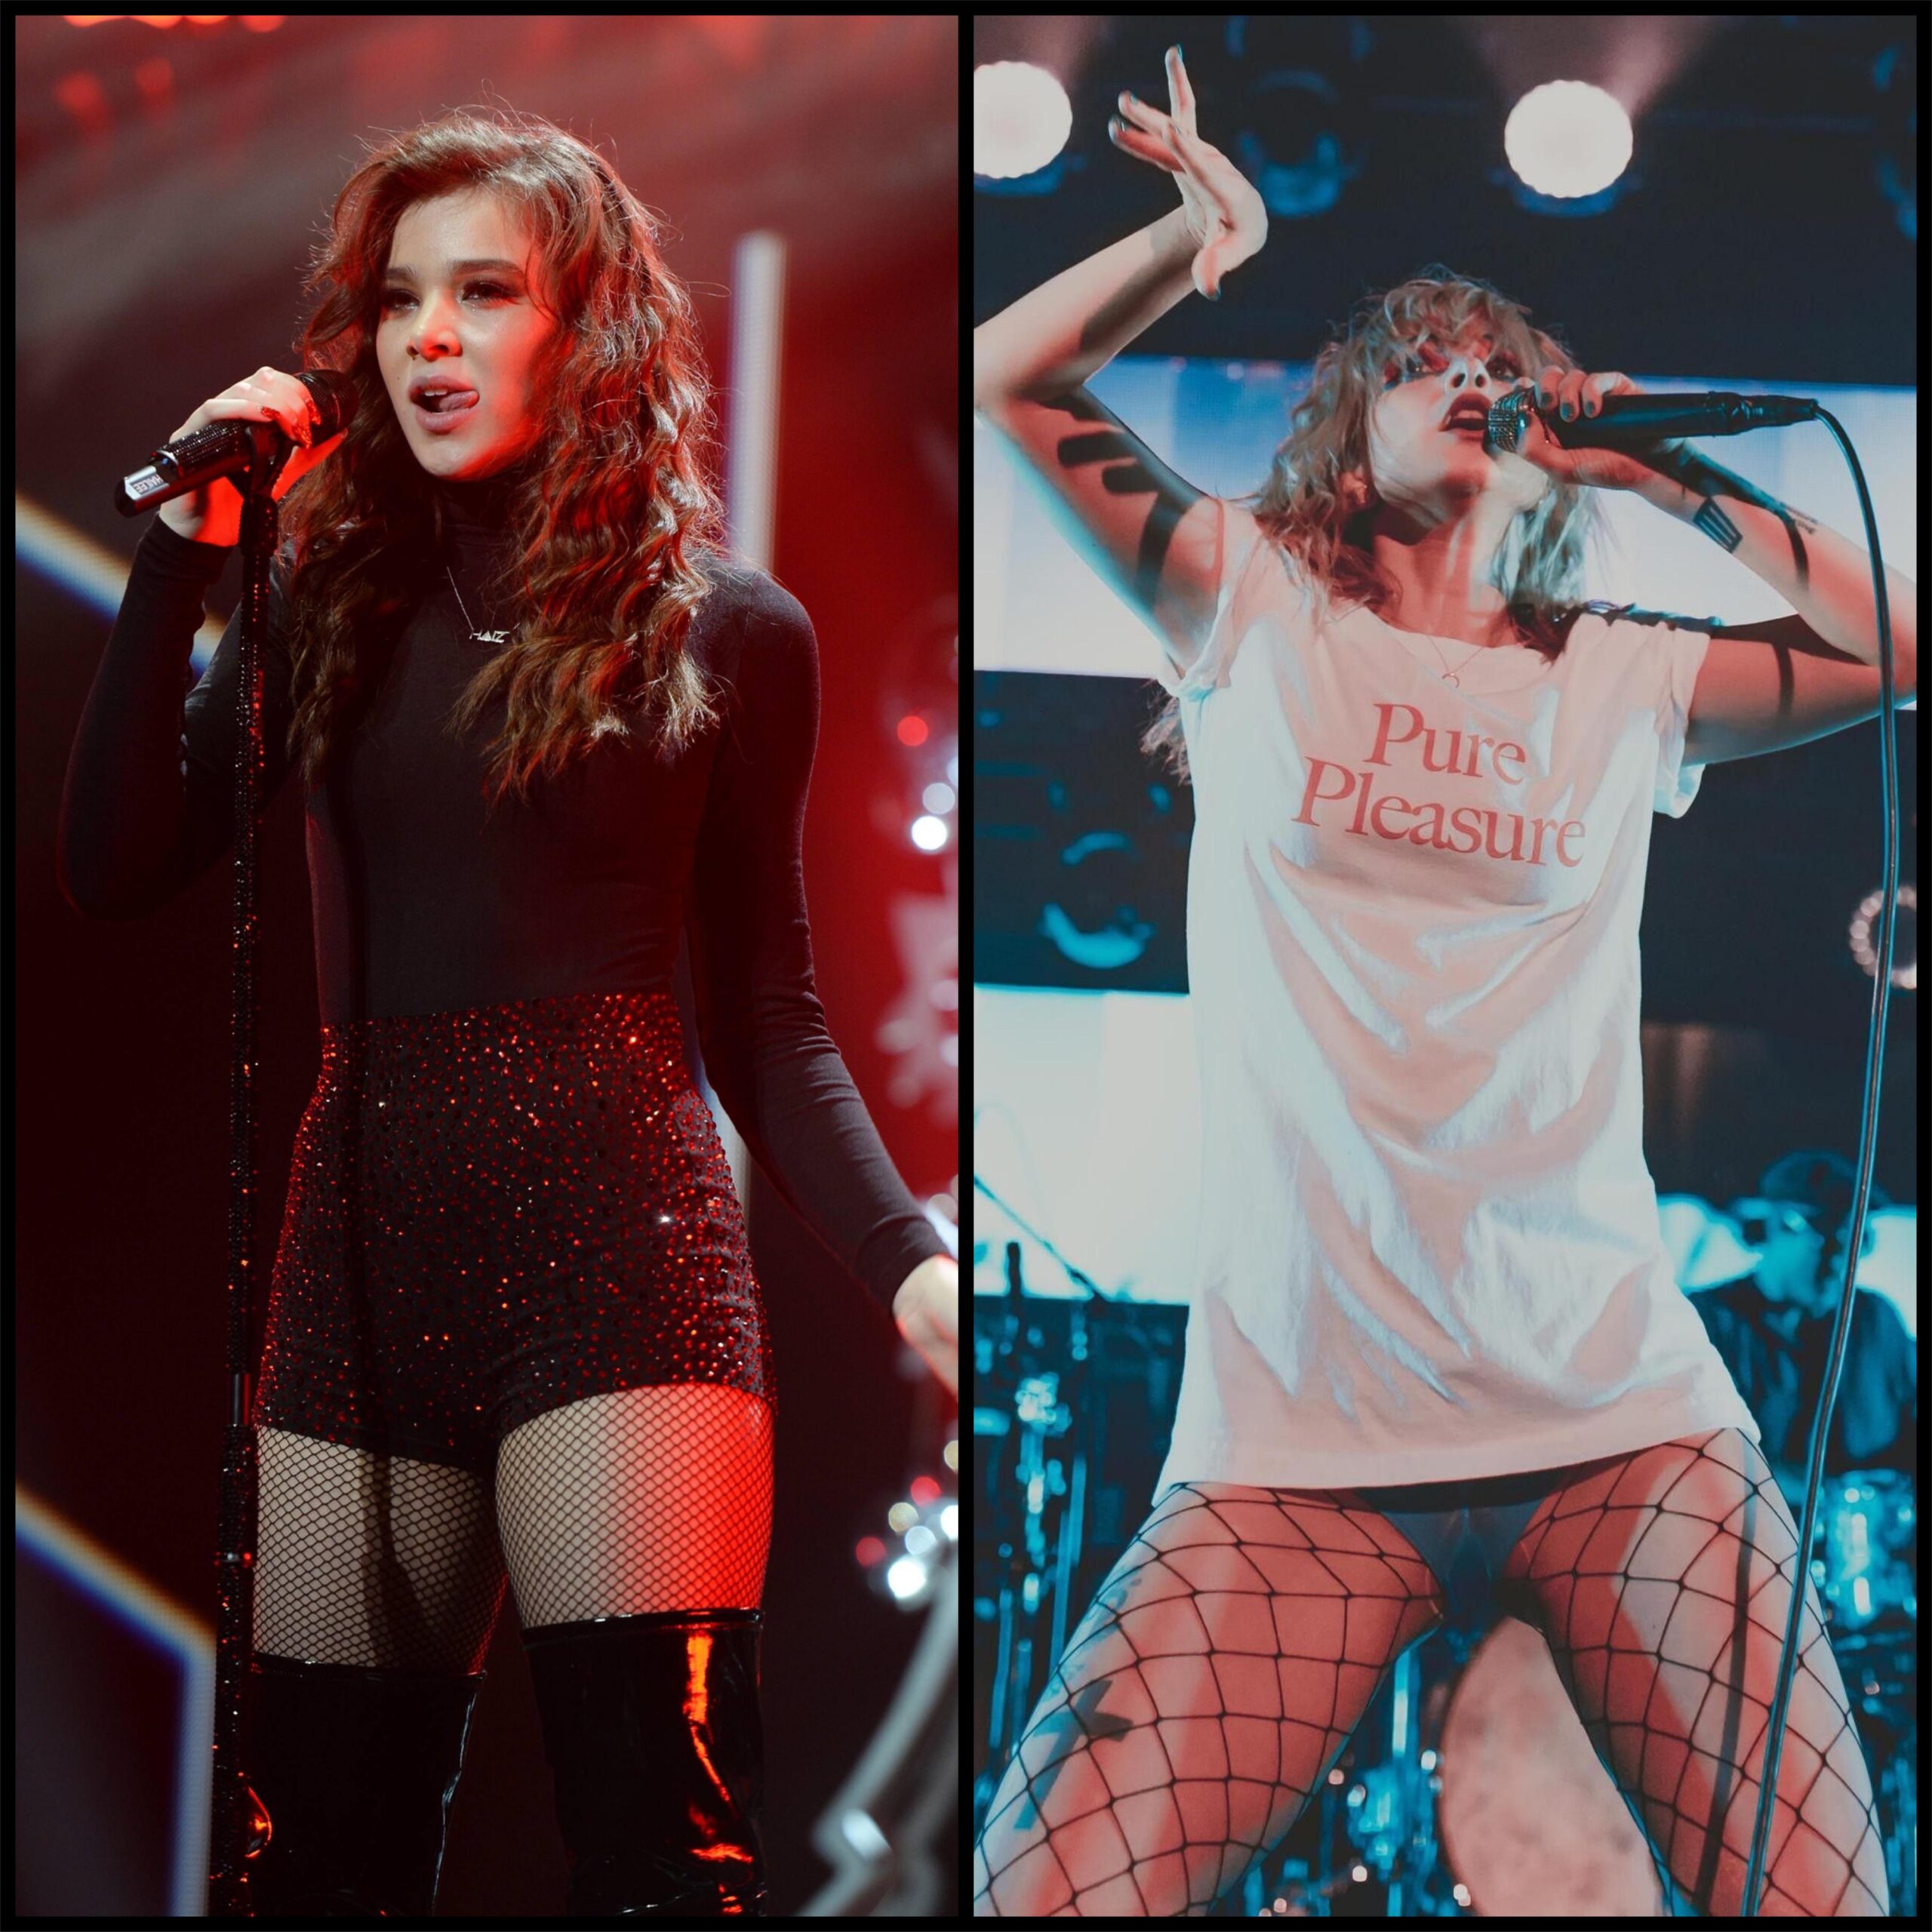 Who should I jerk off to Hailee Steinfeld or Hayley